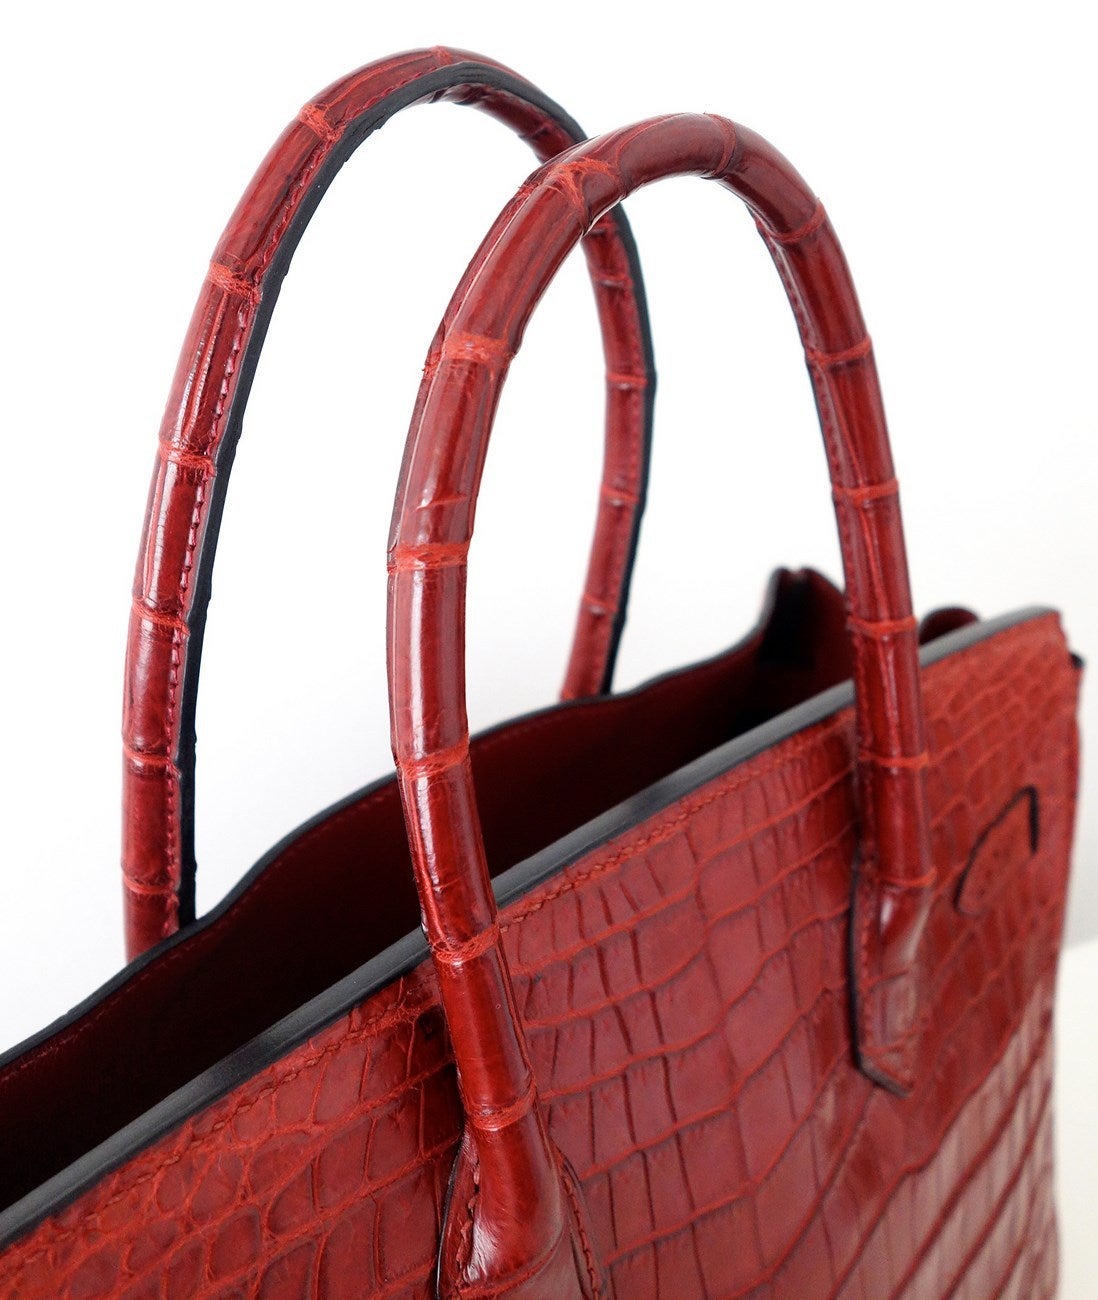 GORGEOUS AUTHENTIC HERMES BAG

BIRKIN

RARE SIZE AND COLORWAY  

Made in France, stamp I in a square

Made of Crocodile Niloticus and Palladium Hardware (silver-Tone)

Lined with red leather

Colorway: ROUGE HERMES (red)

1 main